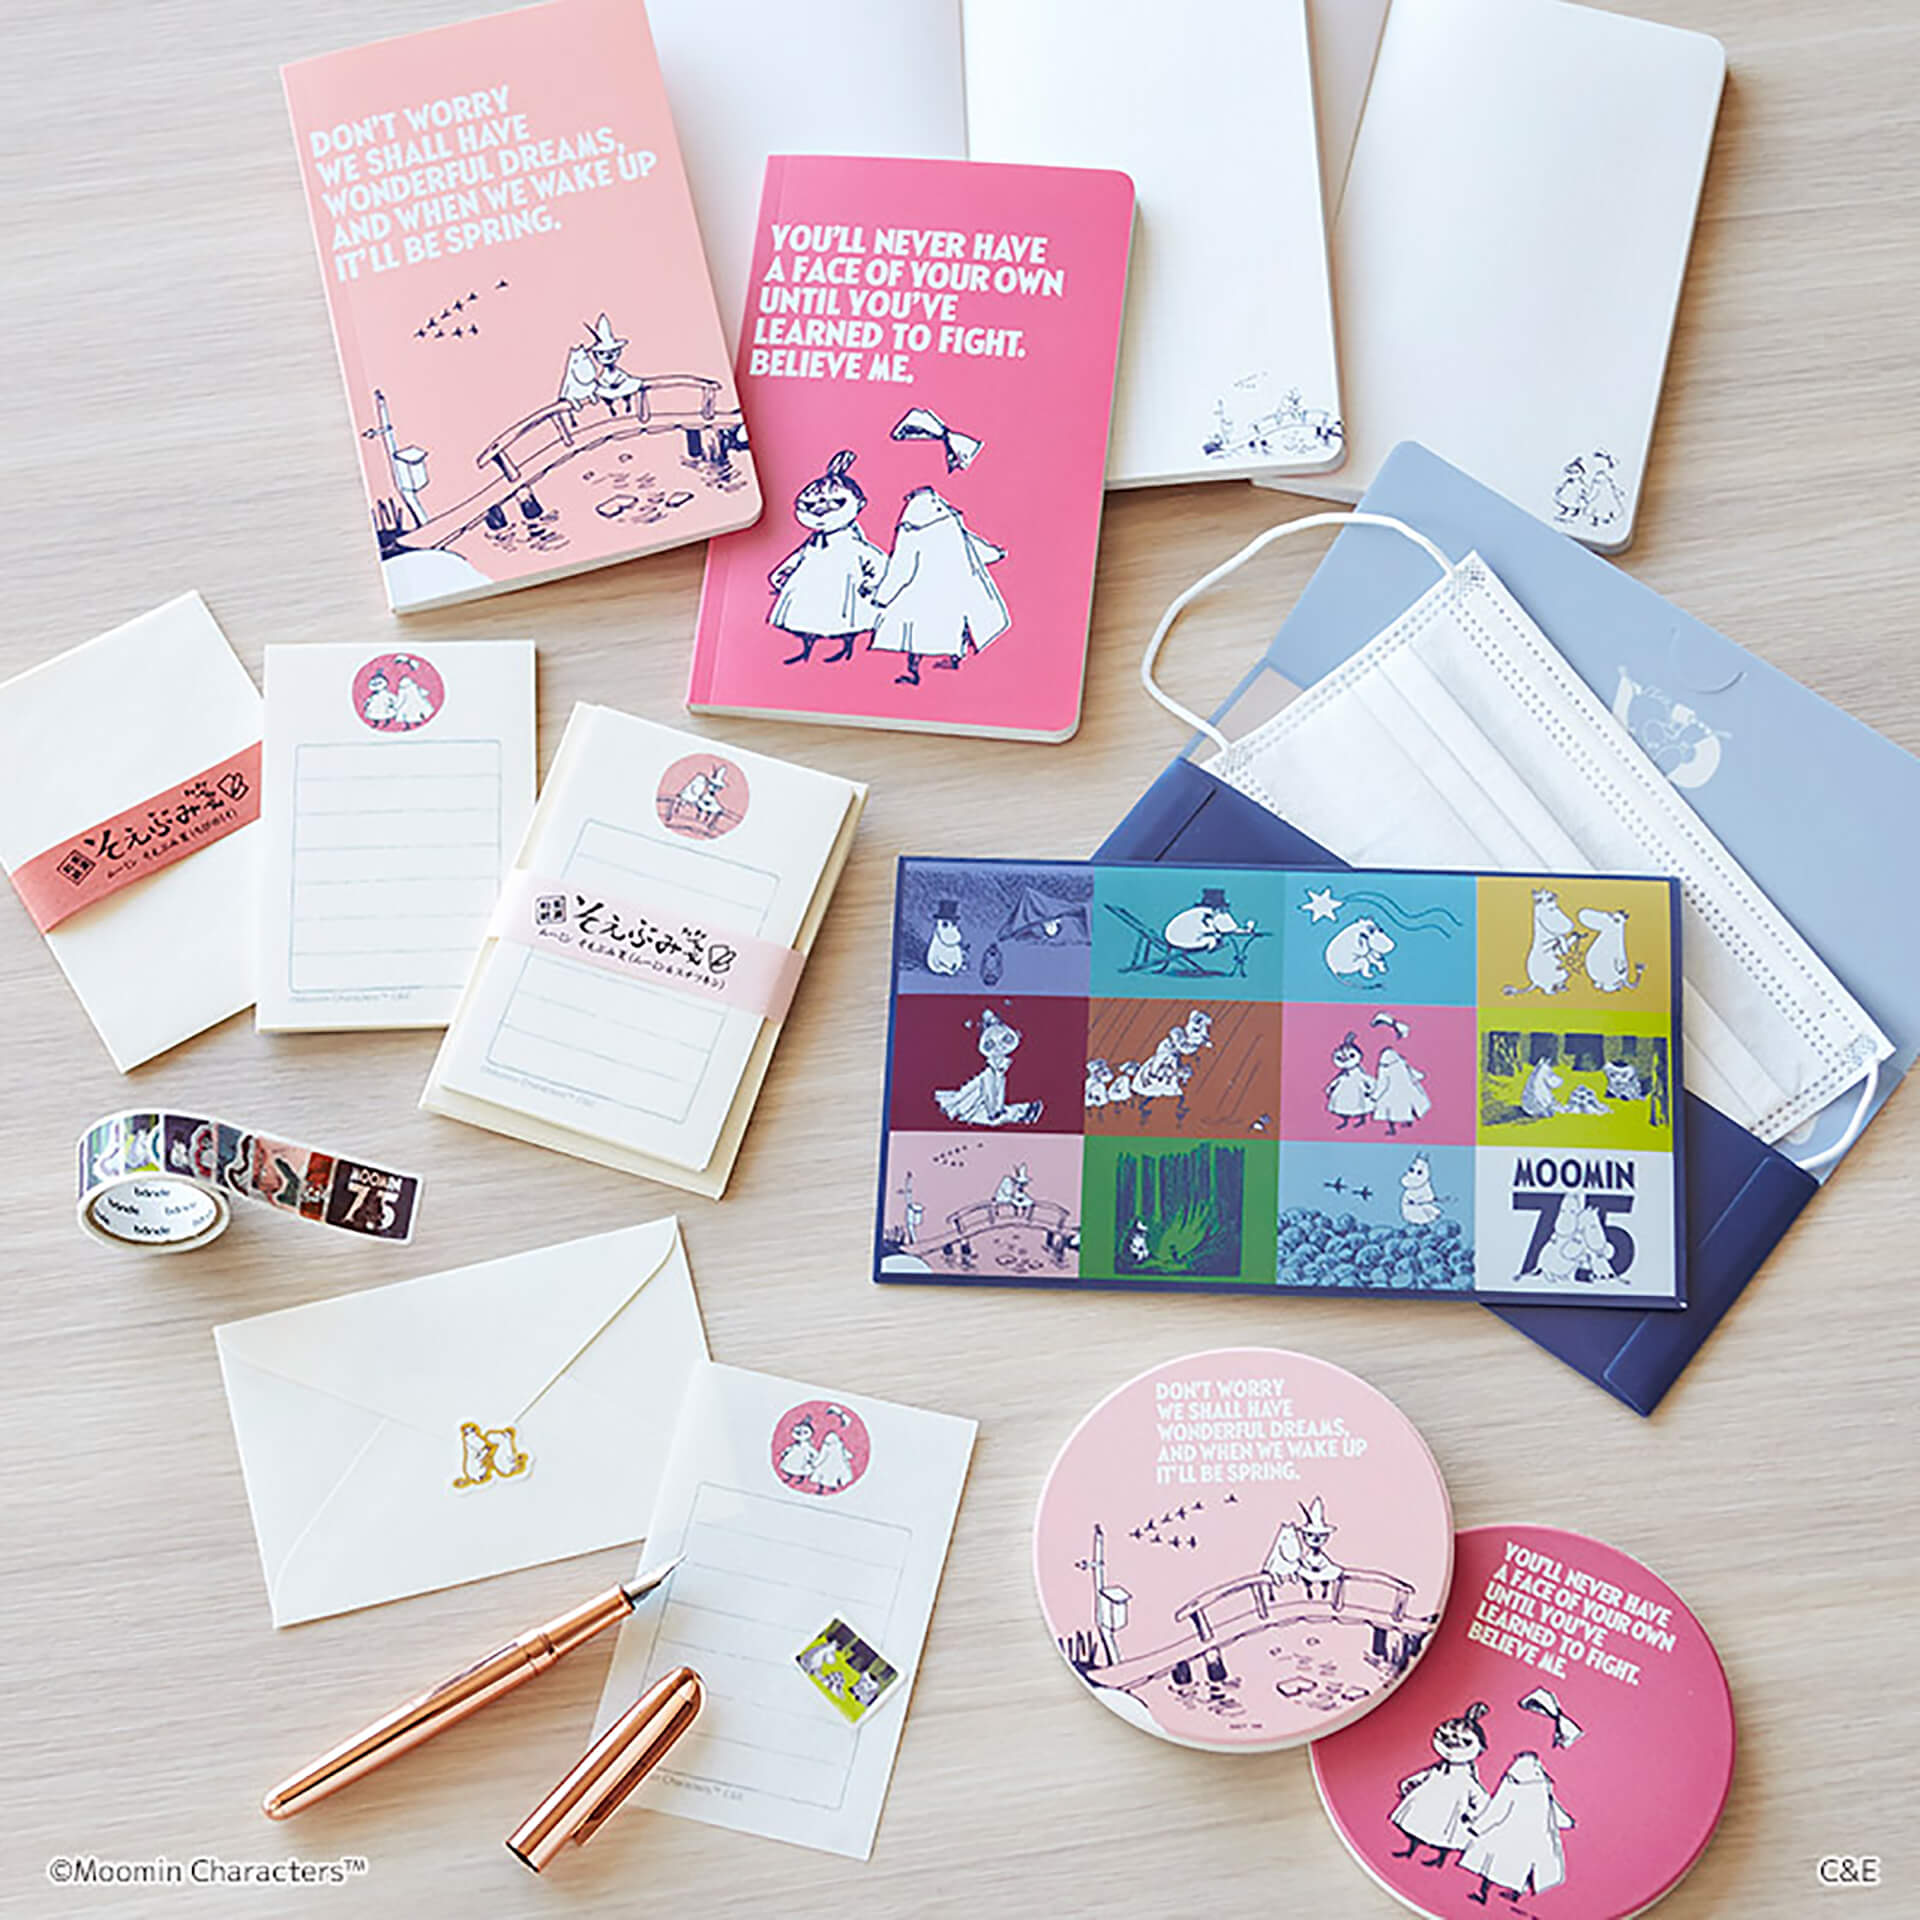 MOOMIN POPUP STORE by Small Planet